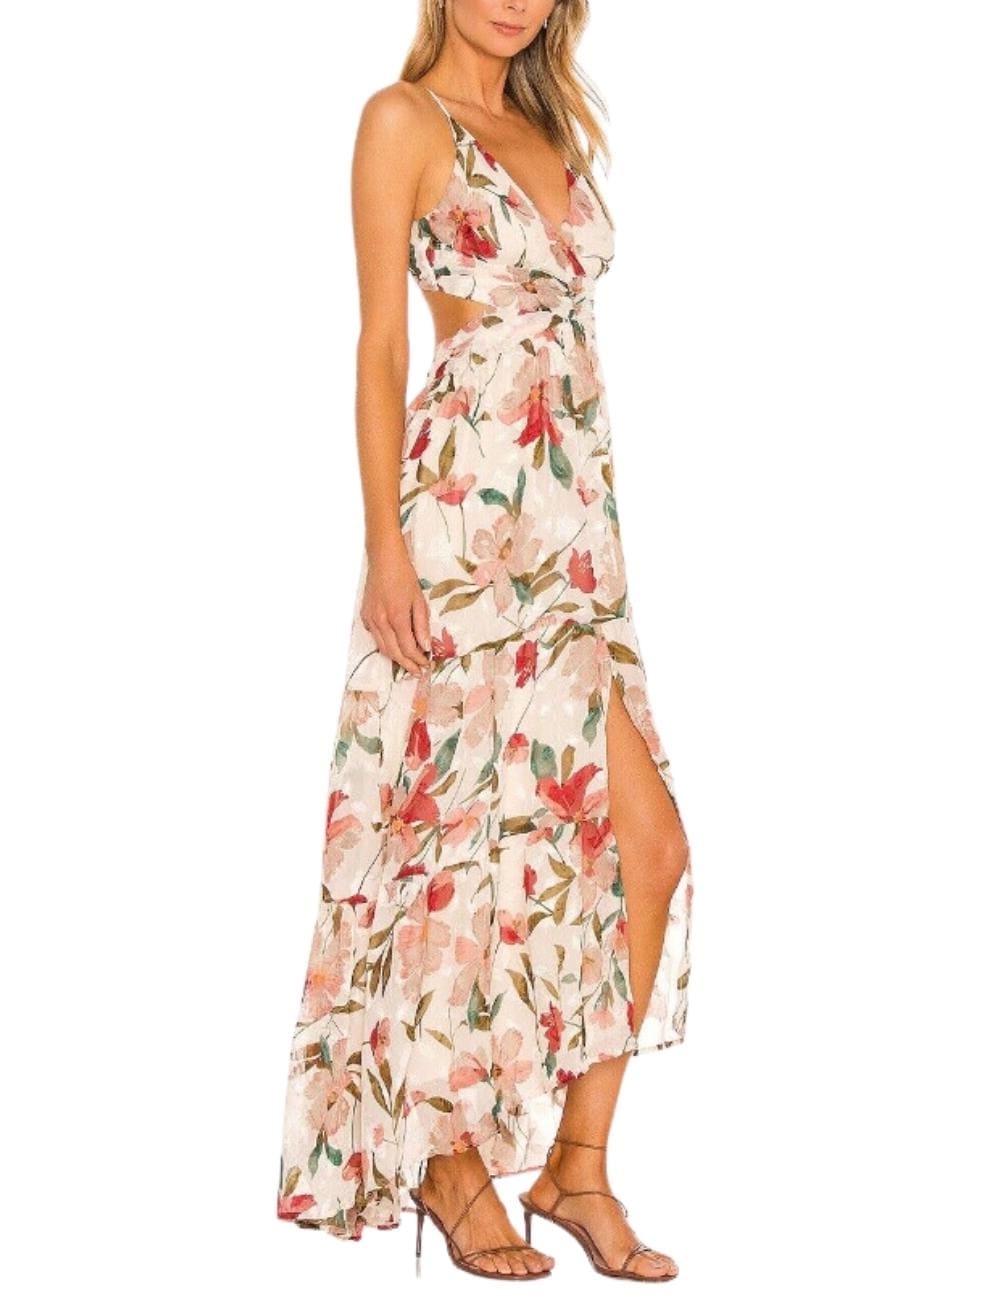 Frolic Floral Maxi Dress in Cream Ruby Floral